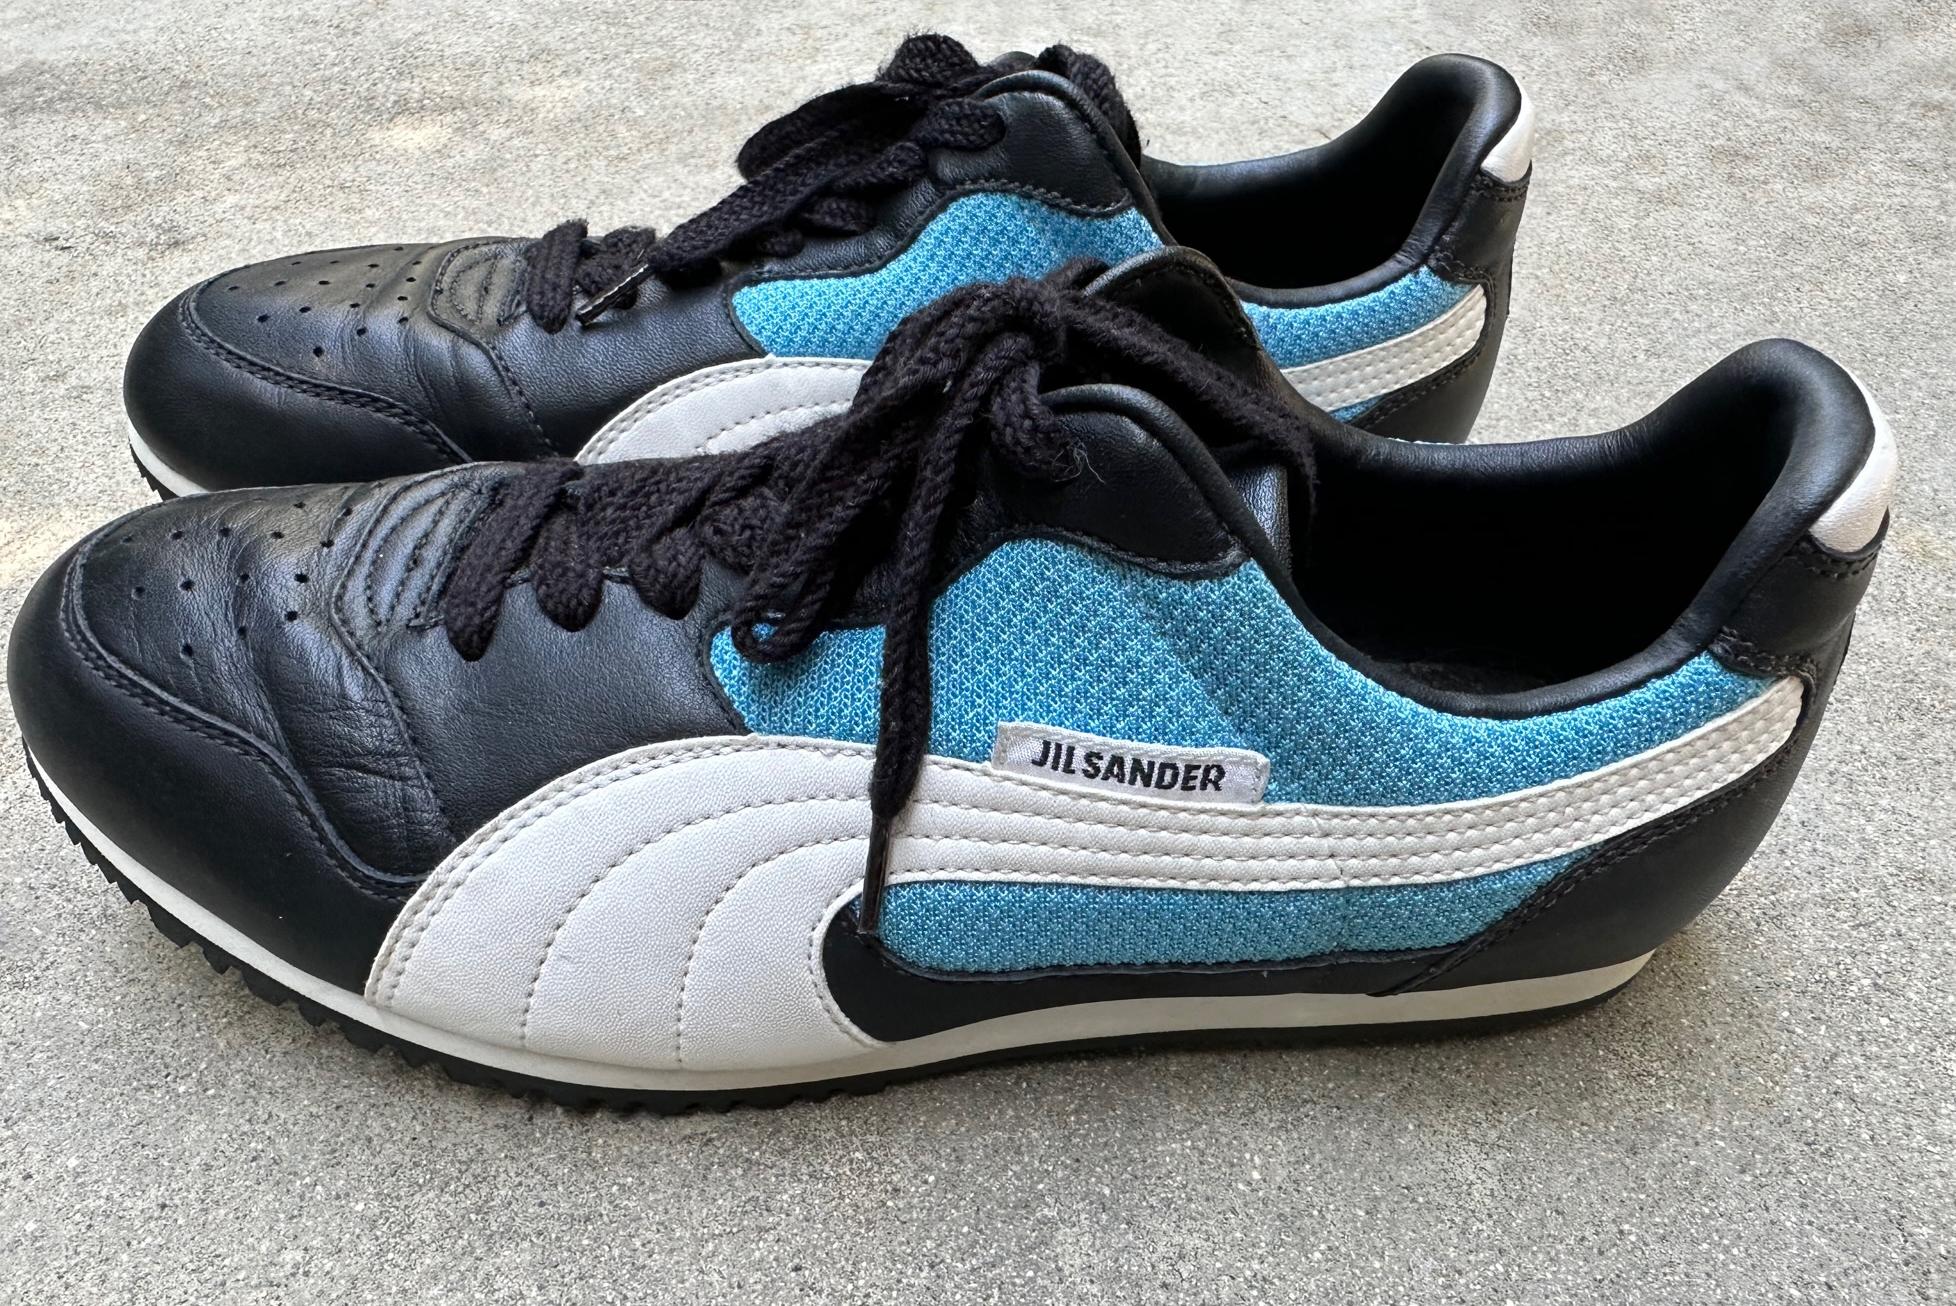 Vintage Puma Jil Sander Tennis Shoes in fantastic condition. Women’s size 9 shoe
Retro style comfortable slim fit.  Exceptionally clean J​​il Sander Women’s shoe for Puma in Navy blue leather with classic white Puma strip on the sides, decorative